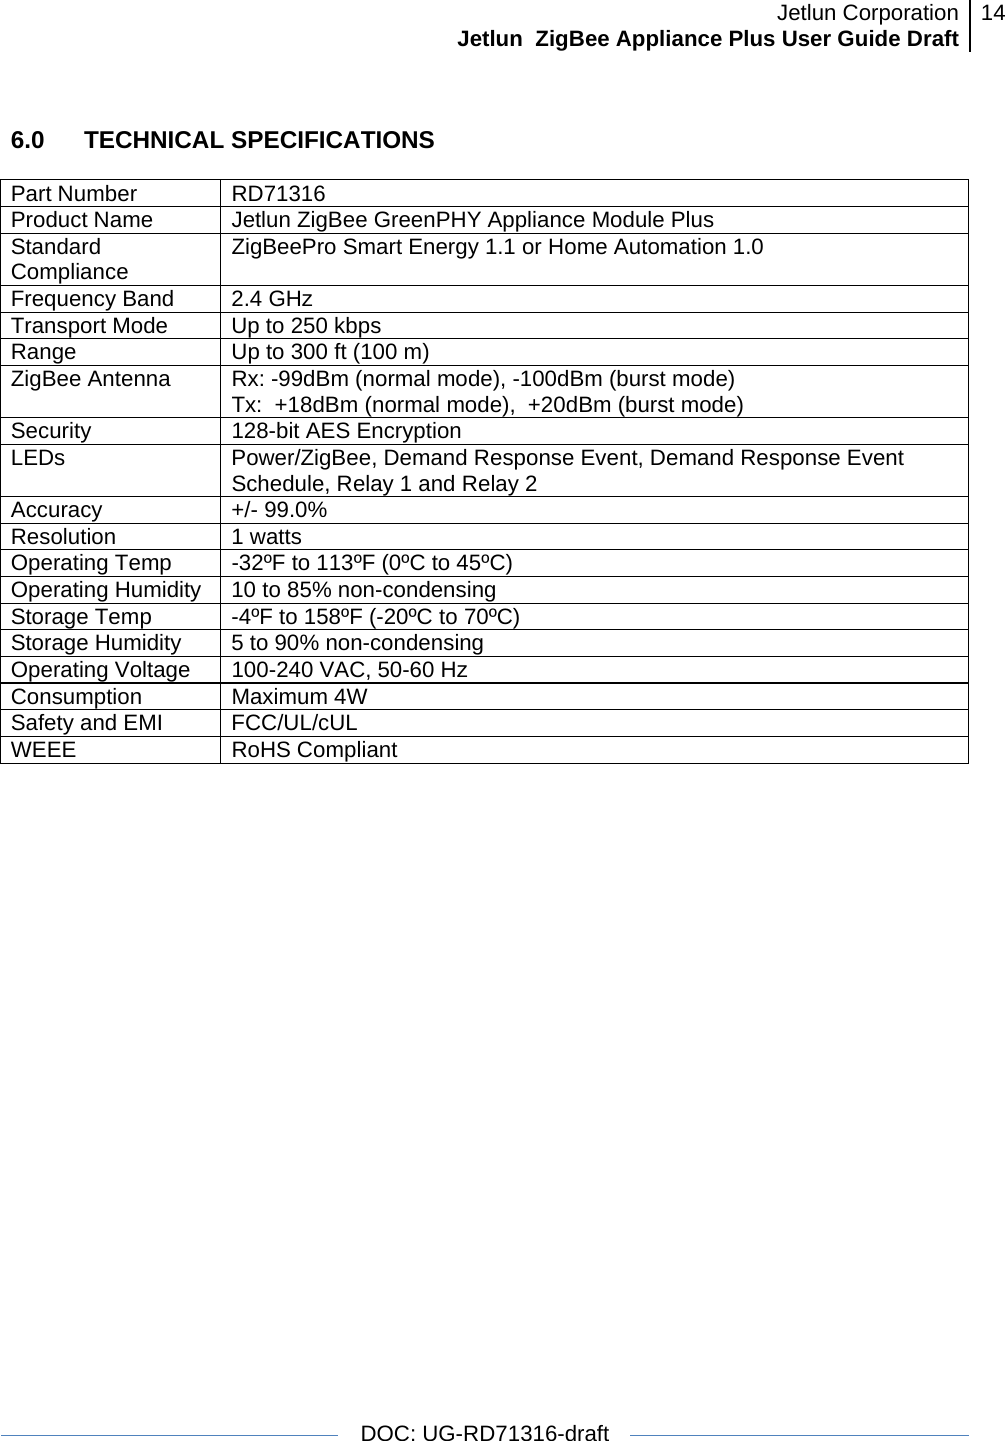 Jetlun CorporationJetlun  ZigBee Appliance Plus User Guide Draft 14   DOC: UG-RD71316-draft  6.0   TECHNICAL SPECIFICATIONS  Part Number  RD71316 Product Name  Jetlun ZigBee GreenPHY Appliance Module Plus Standard Compliance  ZigBeePro Smart Energy 1.1 or Home Automation 1.0 Frequency Band  2.4 GHz Transport Mode   Up to 250 kbps Range  Up to 300 ft (100 m) ZigBee Antenna  Rx: -99dBm (normal mode), -100dBm (burst mode) Tx:  +18dBm (normal mode),  +20dBm (burst mode) Security  128-bit AES Encryption LEDs  Power/ZigBee, Demand Response Event, Demand Response Event Schedule, Relay 1 and Relay 2 Accuracy +/- 99.0% Resolution 1 watts Operating Temp  -32ºF to 113ºF (0ºC to 45ºC) Operating Humidity  10 to 85% non-condensing Storage Temp  -4ºF to 158ºF (-20ºC to 70ºC) Storage Humidity  5 to 90% non-condensing Operating Voltage  100-240 VAC, 50-60 Hz Consumption Maximum 4W Safety and EMI  FCC/UL/cUL WEEE RoHS Compliant 